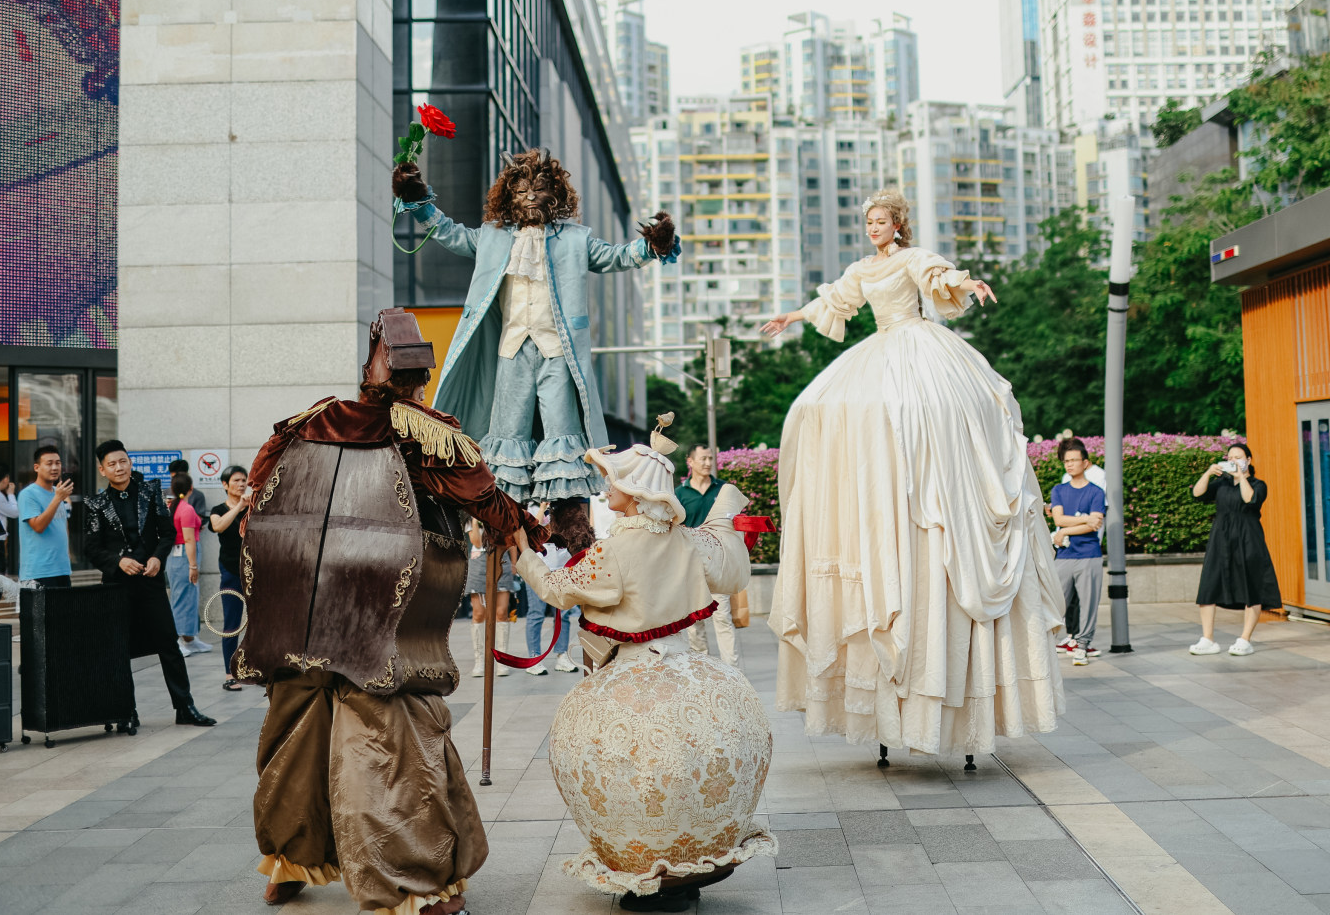 The cast members of Beauty and the Beast are seen promoting the show on the street in Shenzhen, attracting many locals to interact. /Photo provided to CGTN